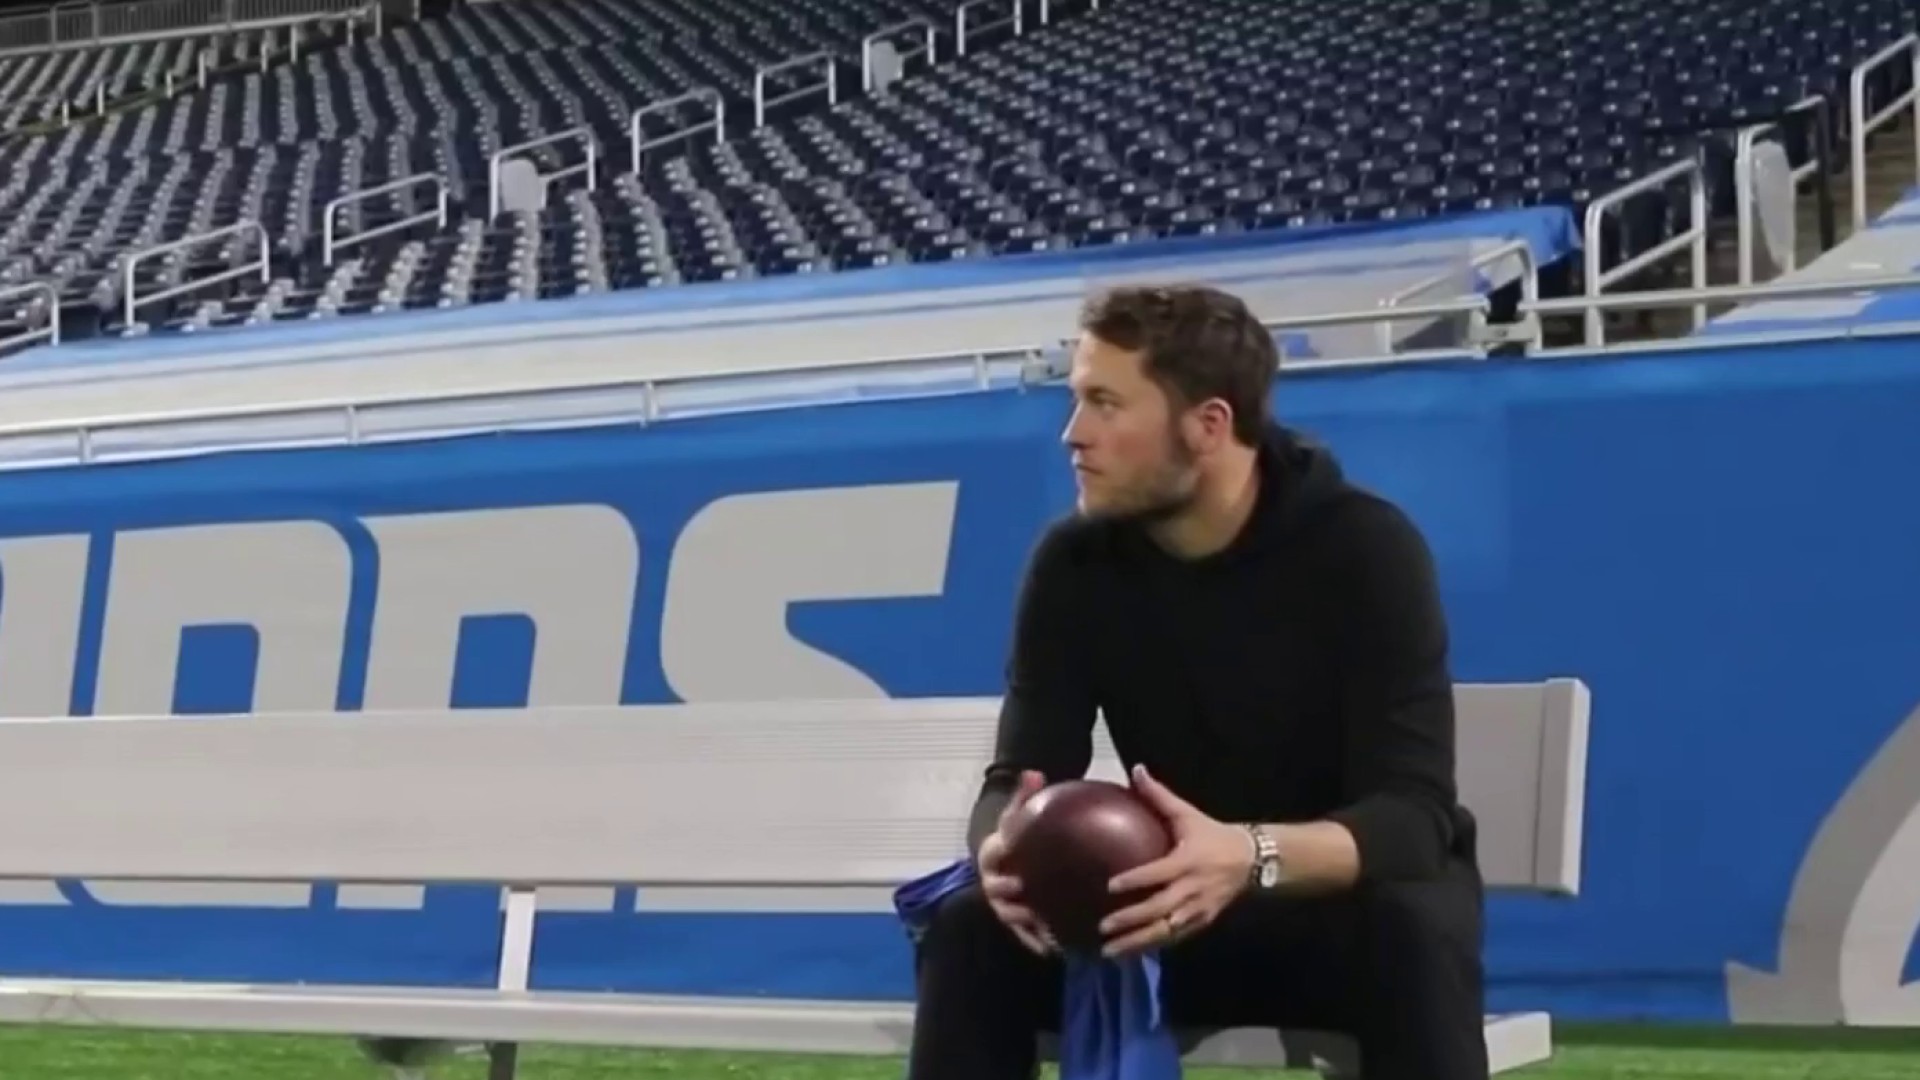 Matthew Stafford says he regrets reaction to photographer who